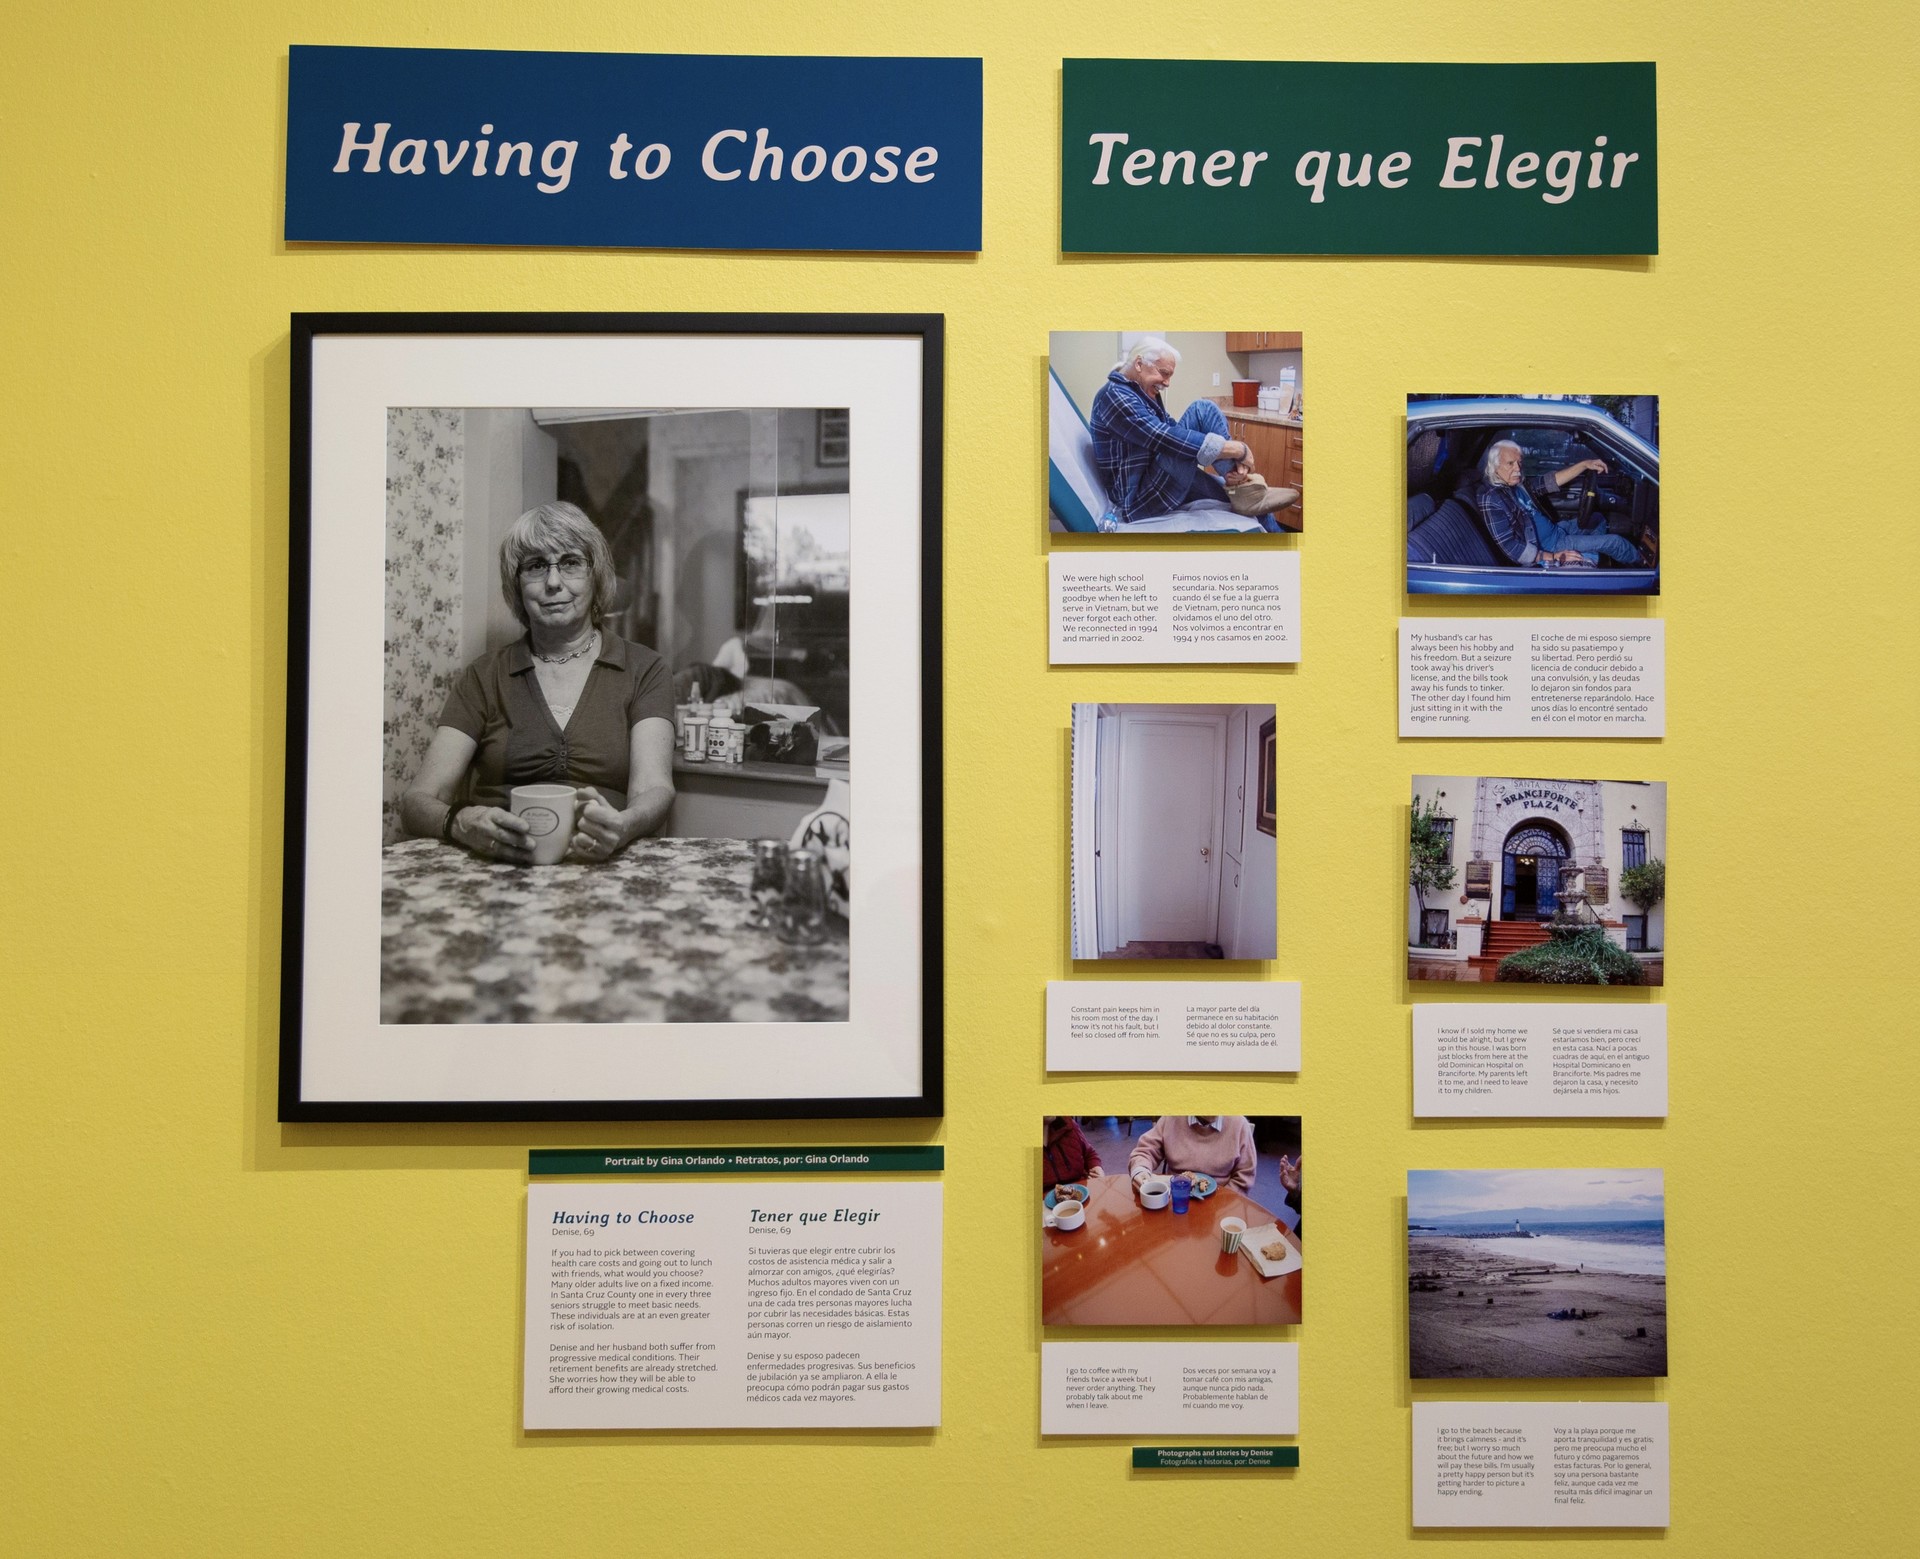 "Having to Choose/Tener que Elegir" tells the story of 69 year-old Denise a senior profiled by Santa Cruz artist Gina Orlando for the exhibit We're Still Here at the Santa Cruz Museum of Art and History.